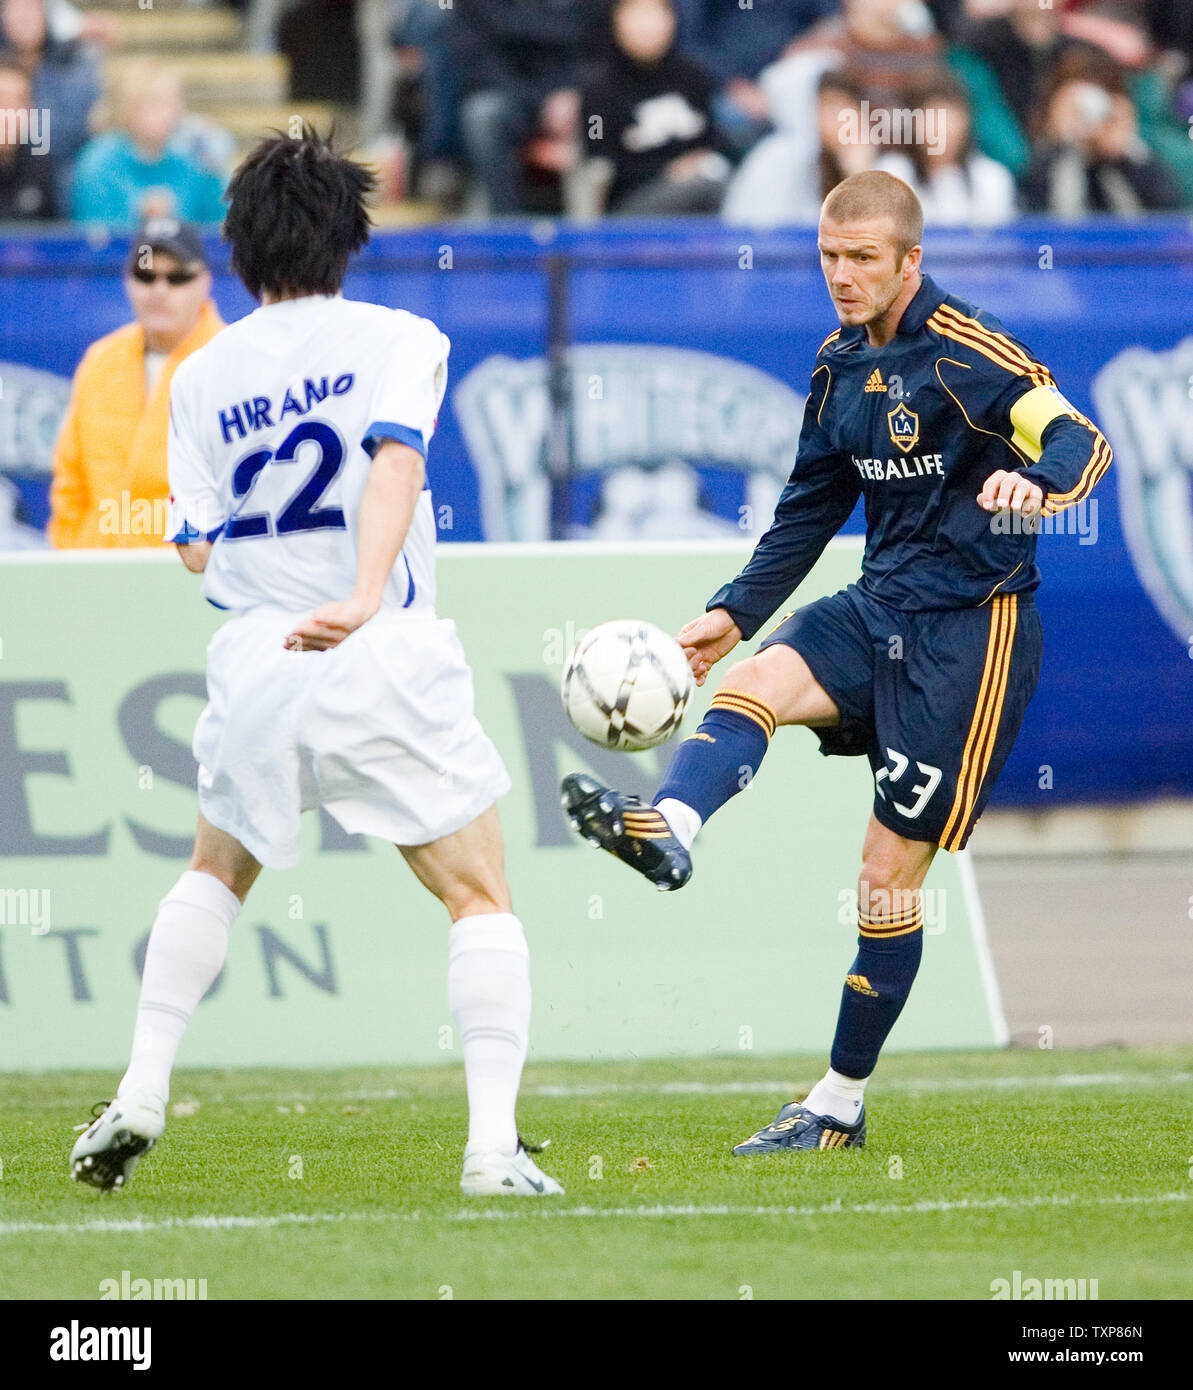 David Beckham (R) of the LA Galaxy kicks the ball past Vancouver Whitecaps Takashi Hirano from Japan during the first half of an exhibition soccer game at Commonwealth Stadium in Edmonton, Alberta on May 13, 2008.  (UPI Photo/Heinz Ruckemann) Stock Photo